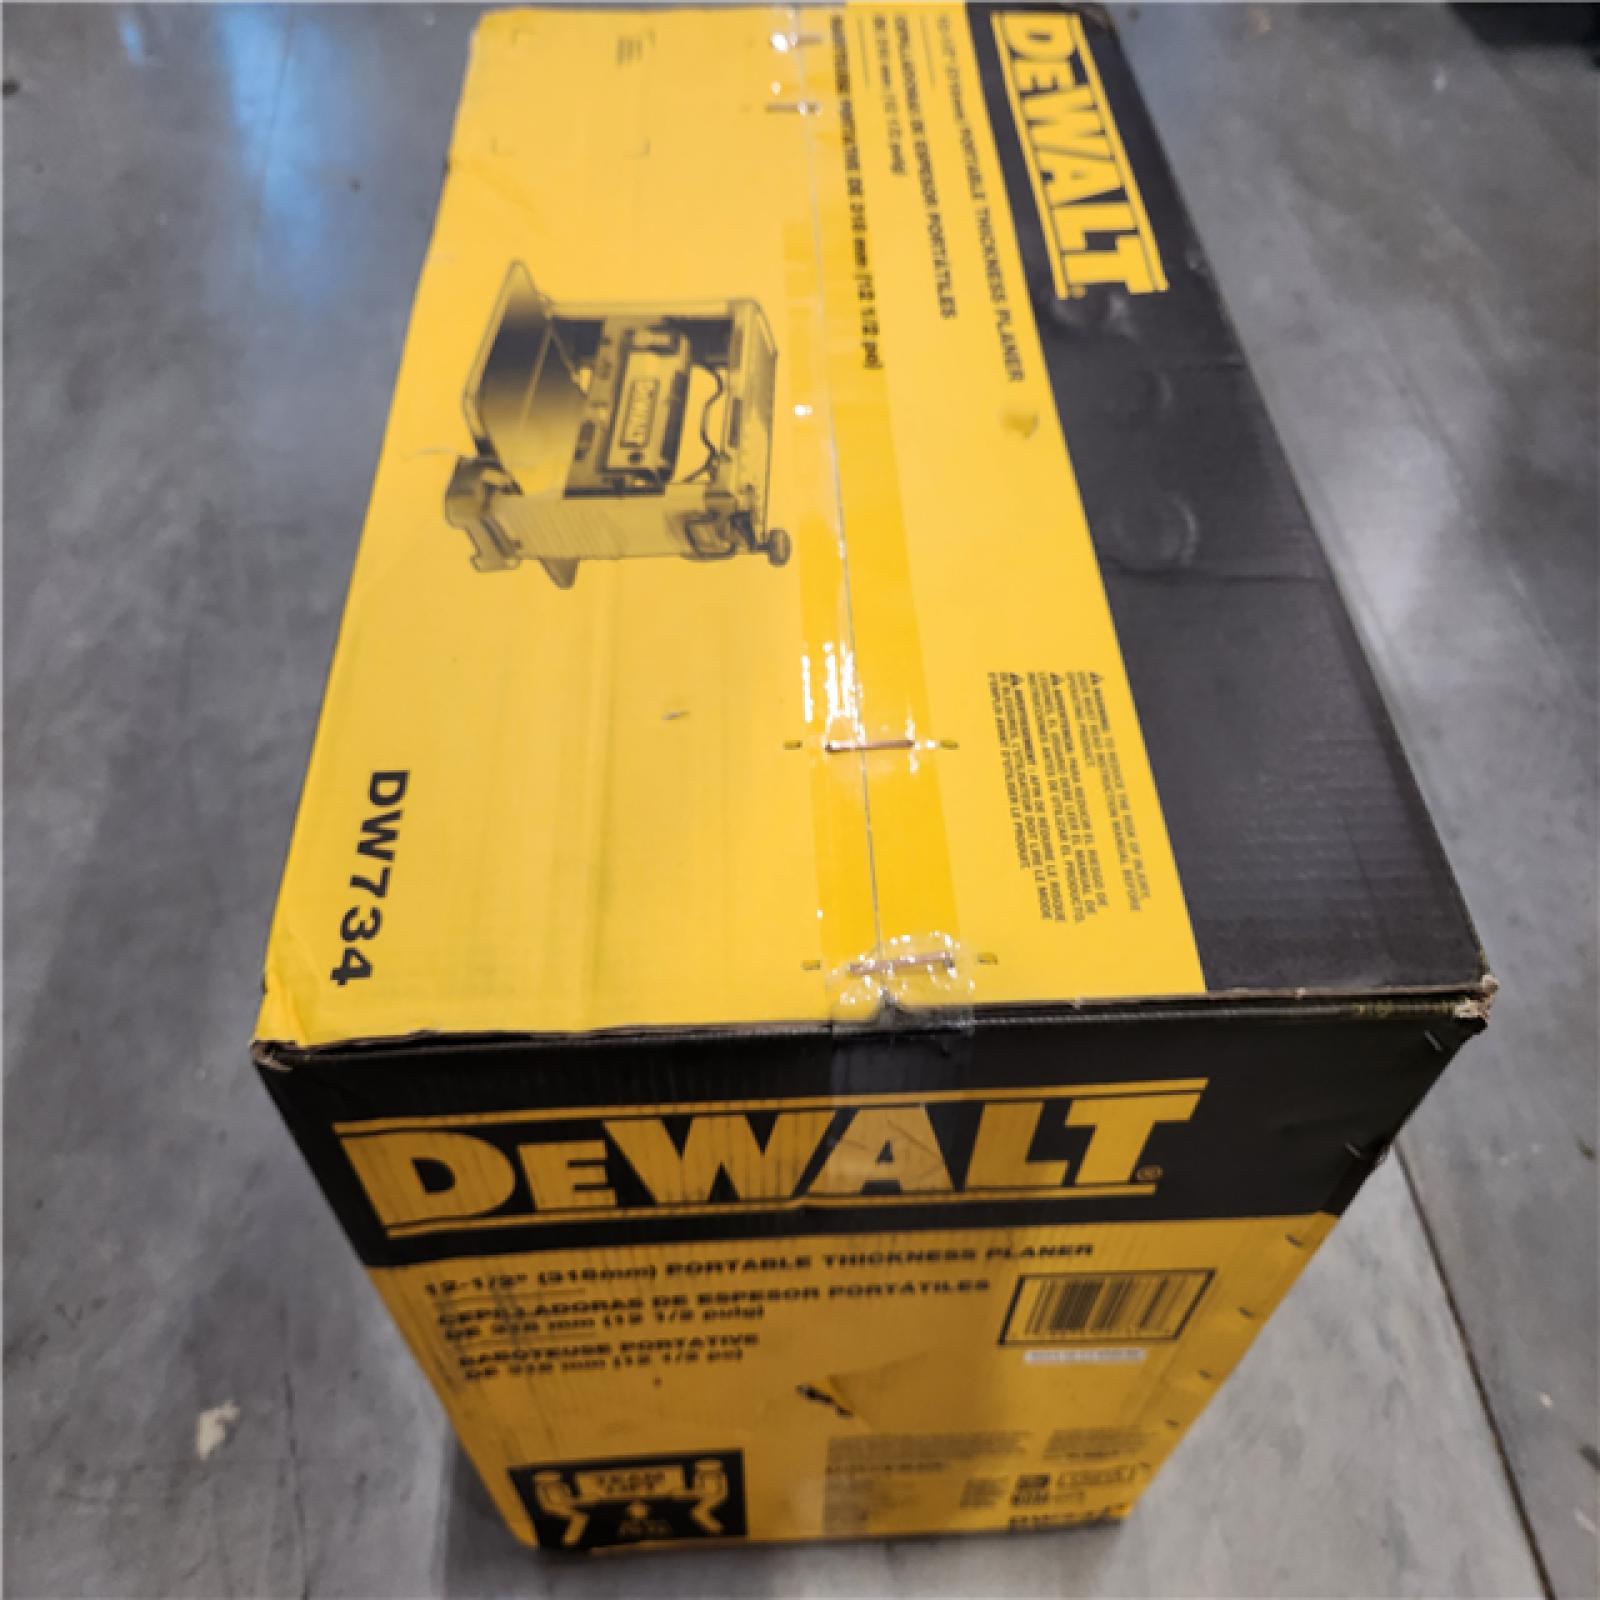 NEW! DEWALT 15 Amp Corded 12.5 in. Bench Thickness Planer